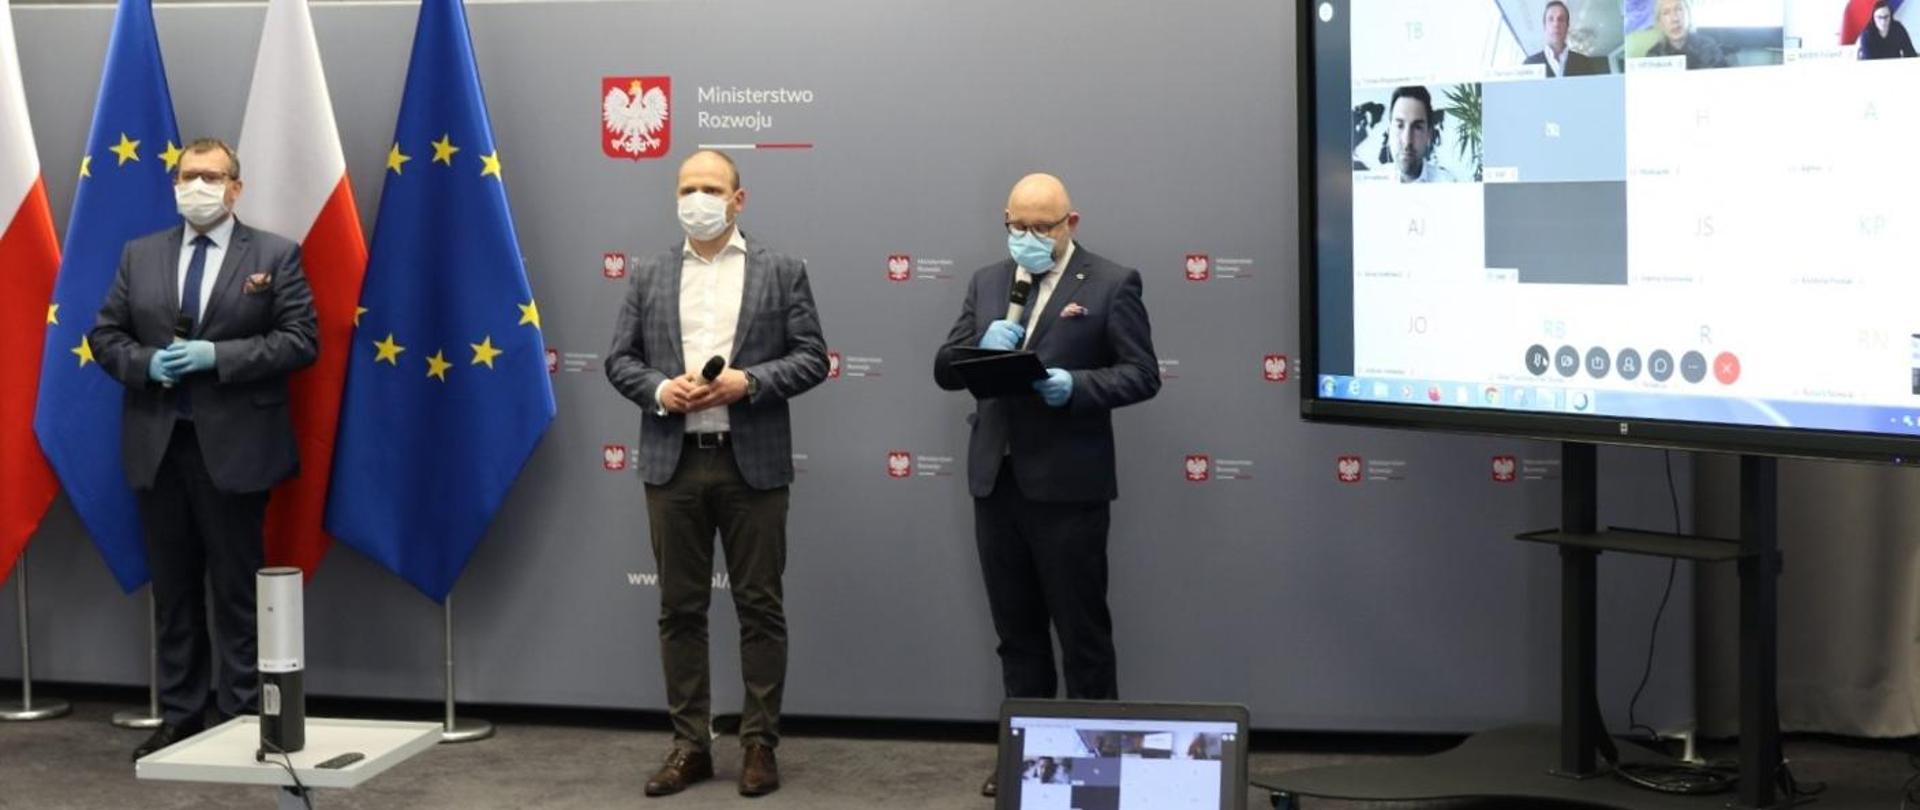 Press conference with the participation of the president of arp. The participants wear masks.